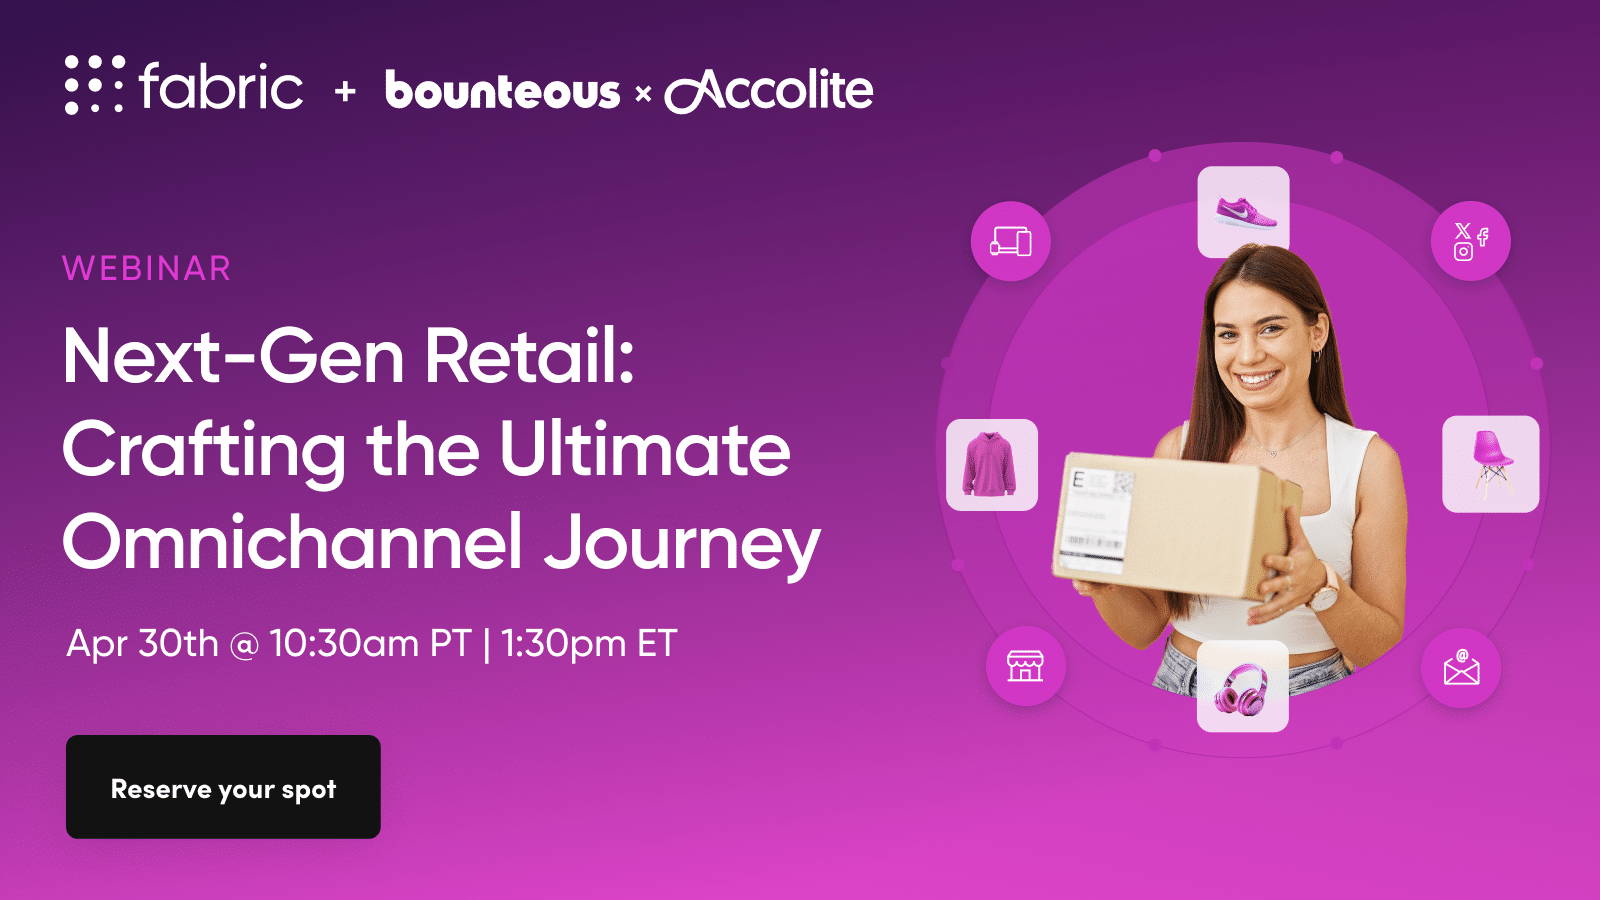 reserve your spot for fabric + bounteous + Accolite webinar.